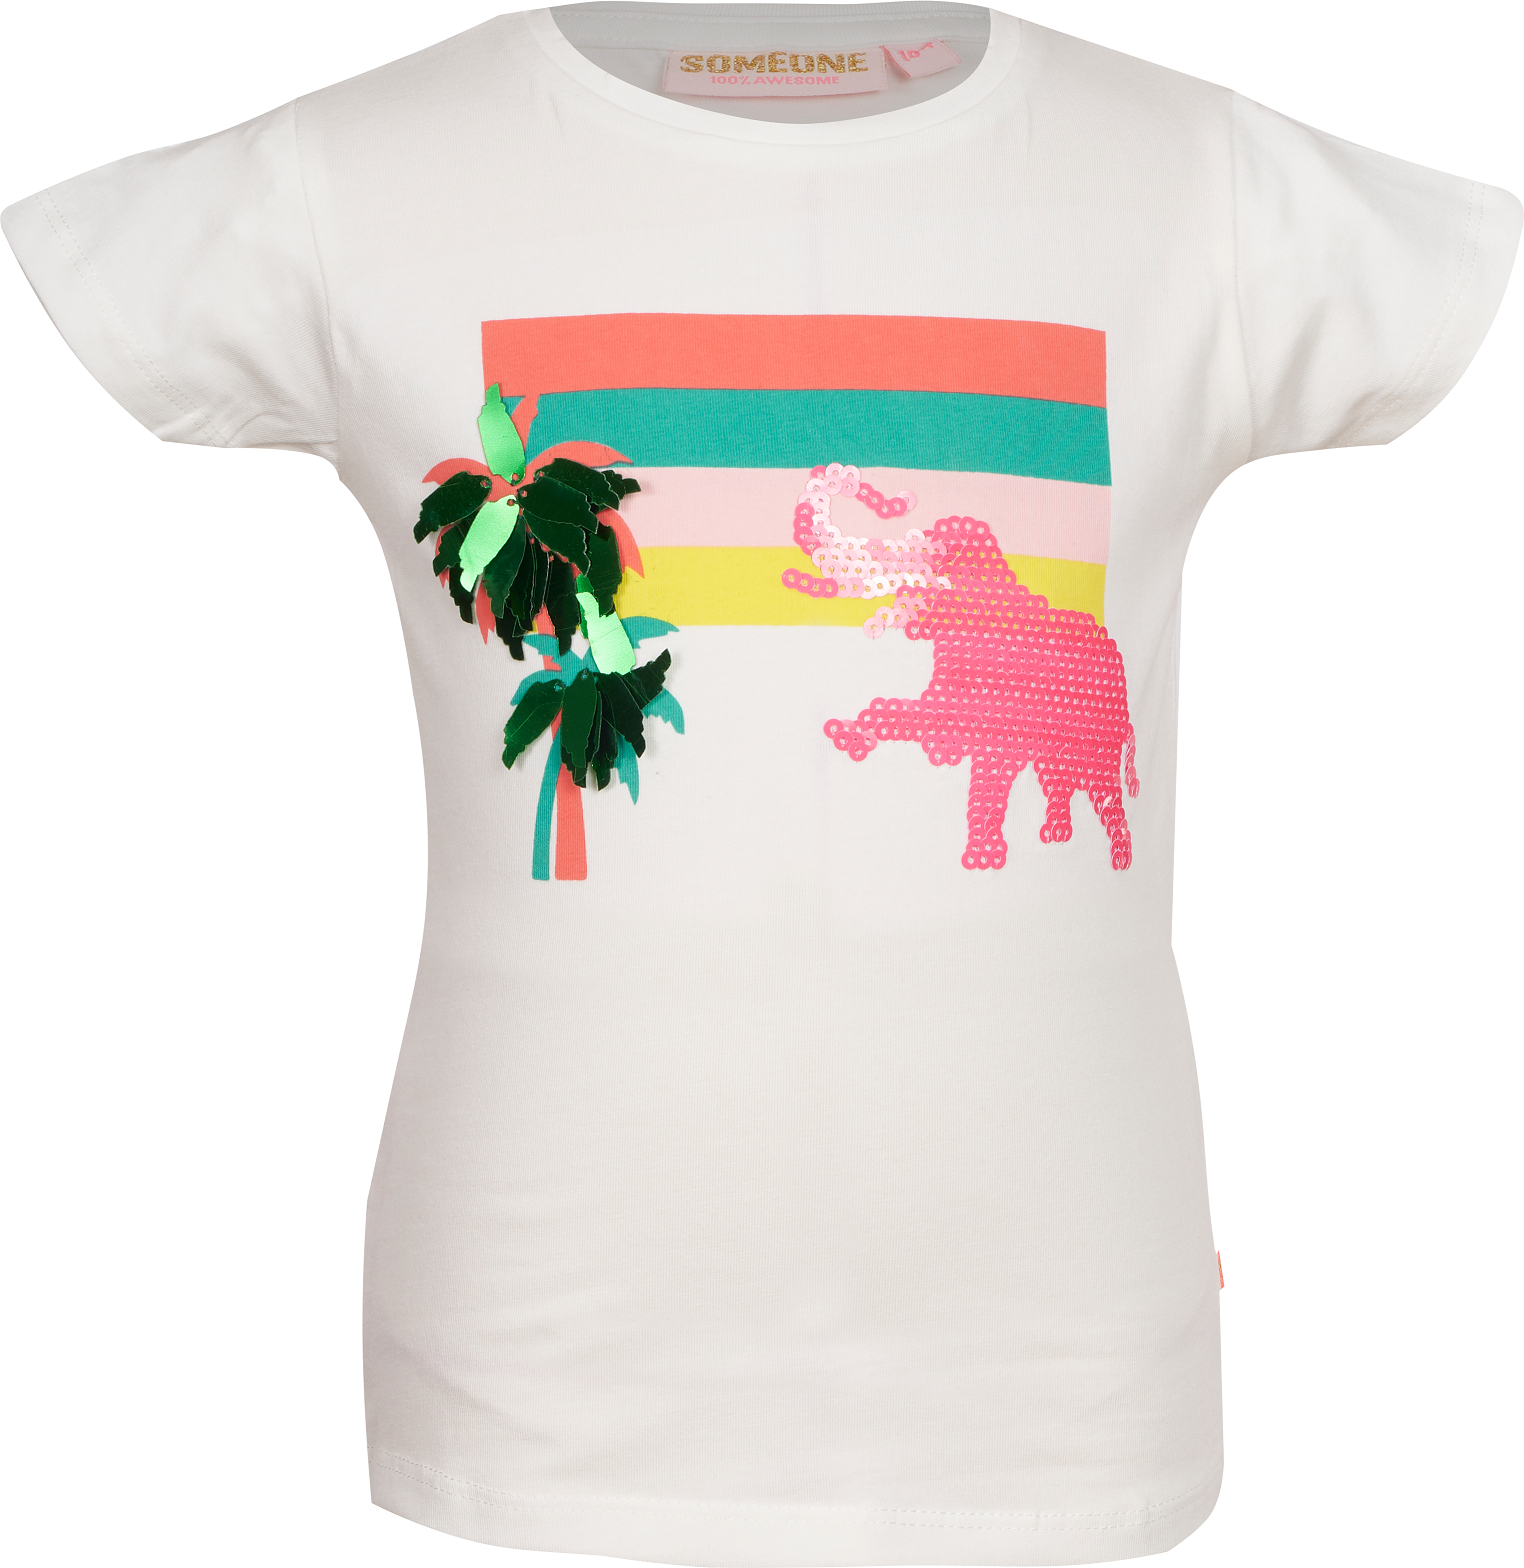 Someone T-shirt with elephant